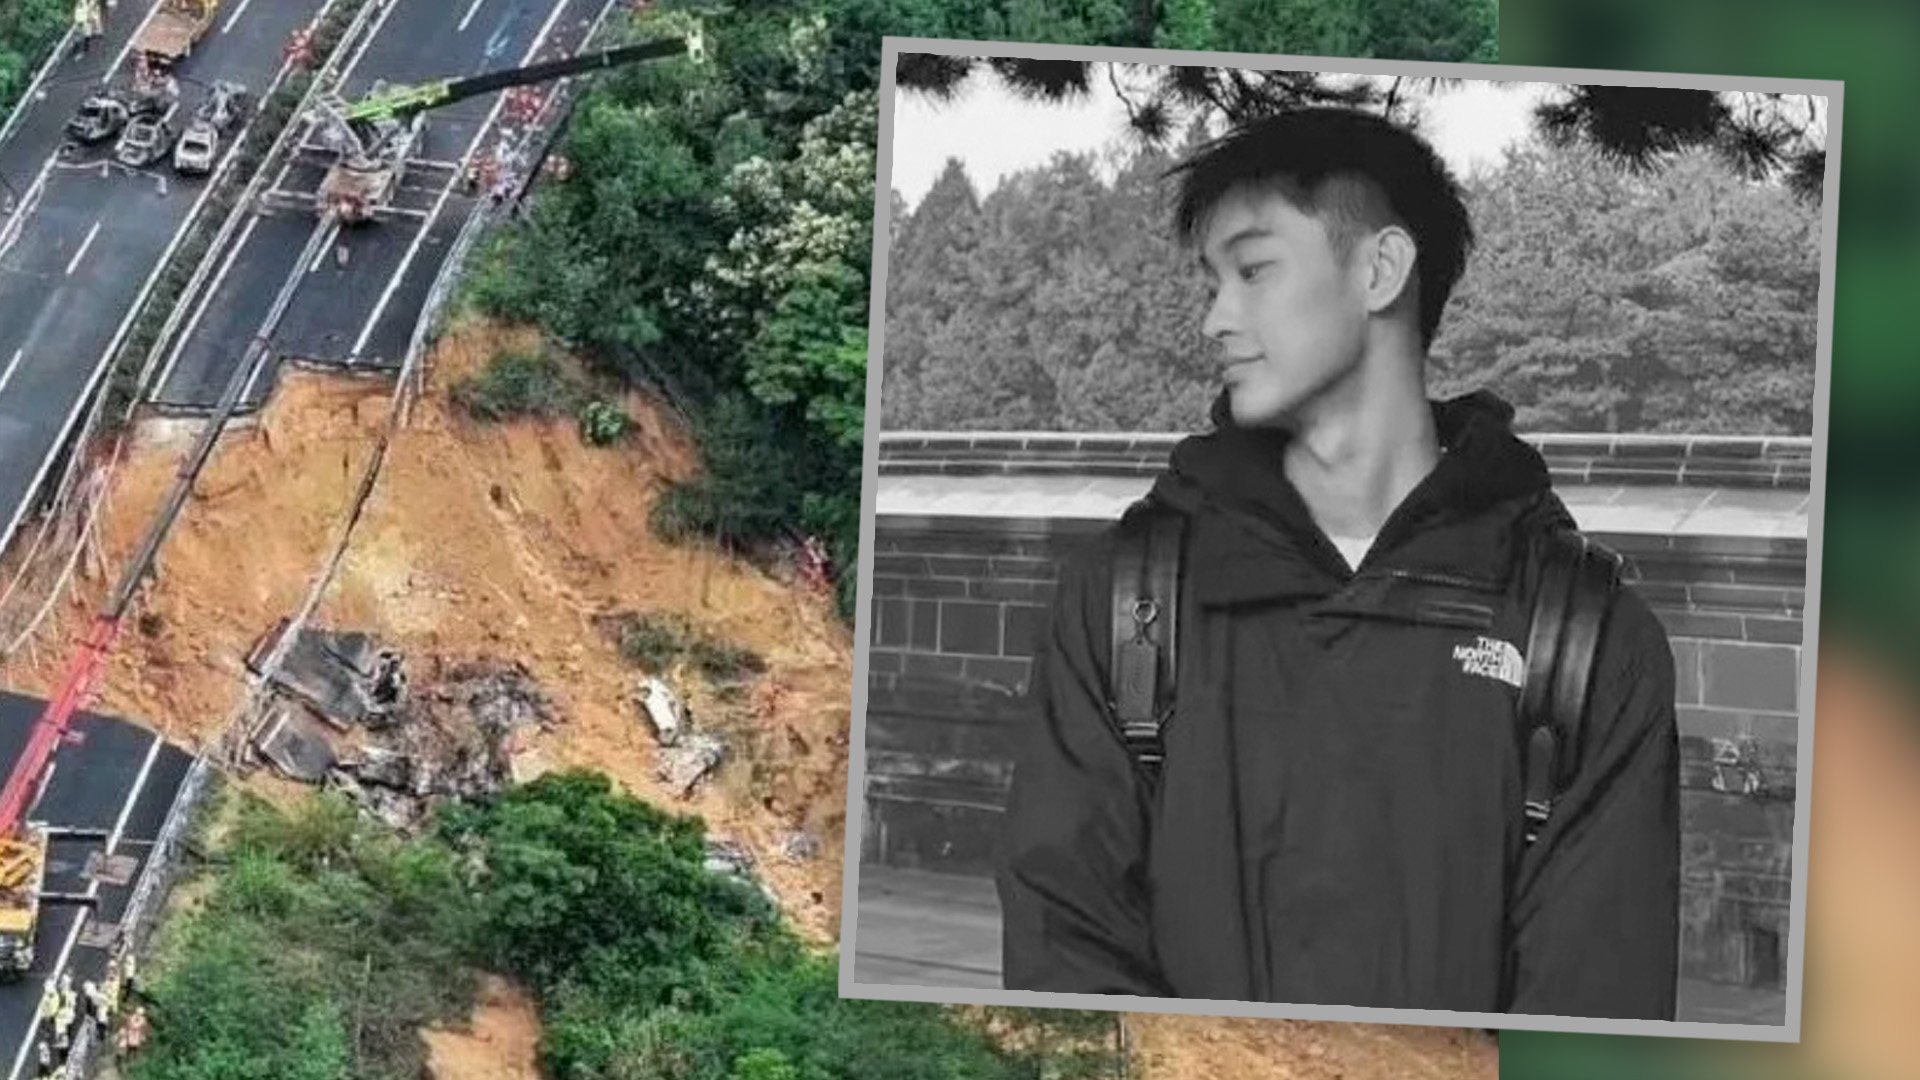 Teachers and schoolmates of a university student who perished in a road collapse tragedy in southern China have paid tribute to their friend in a moving obituary. Photo: SCMP composite/QQ.com/Weibo